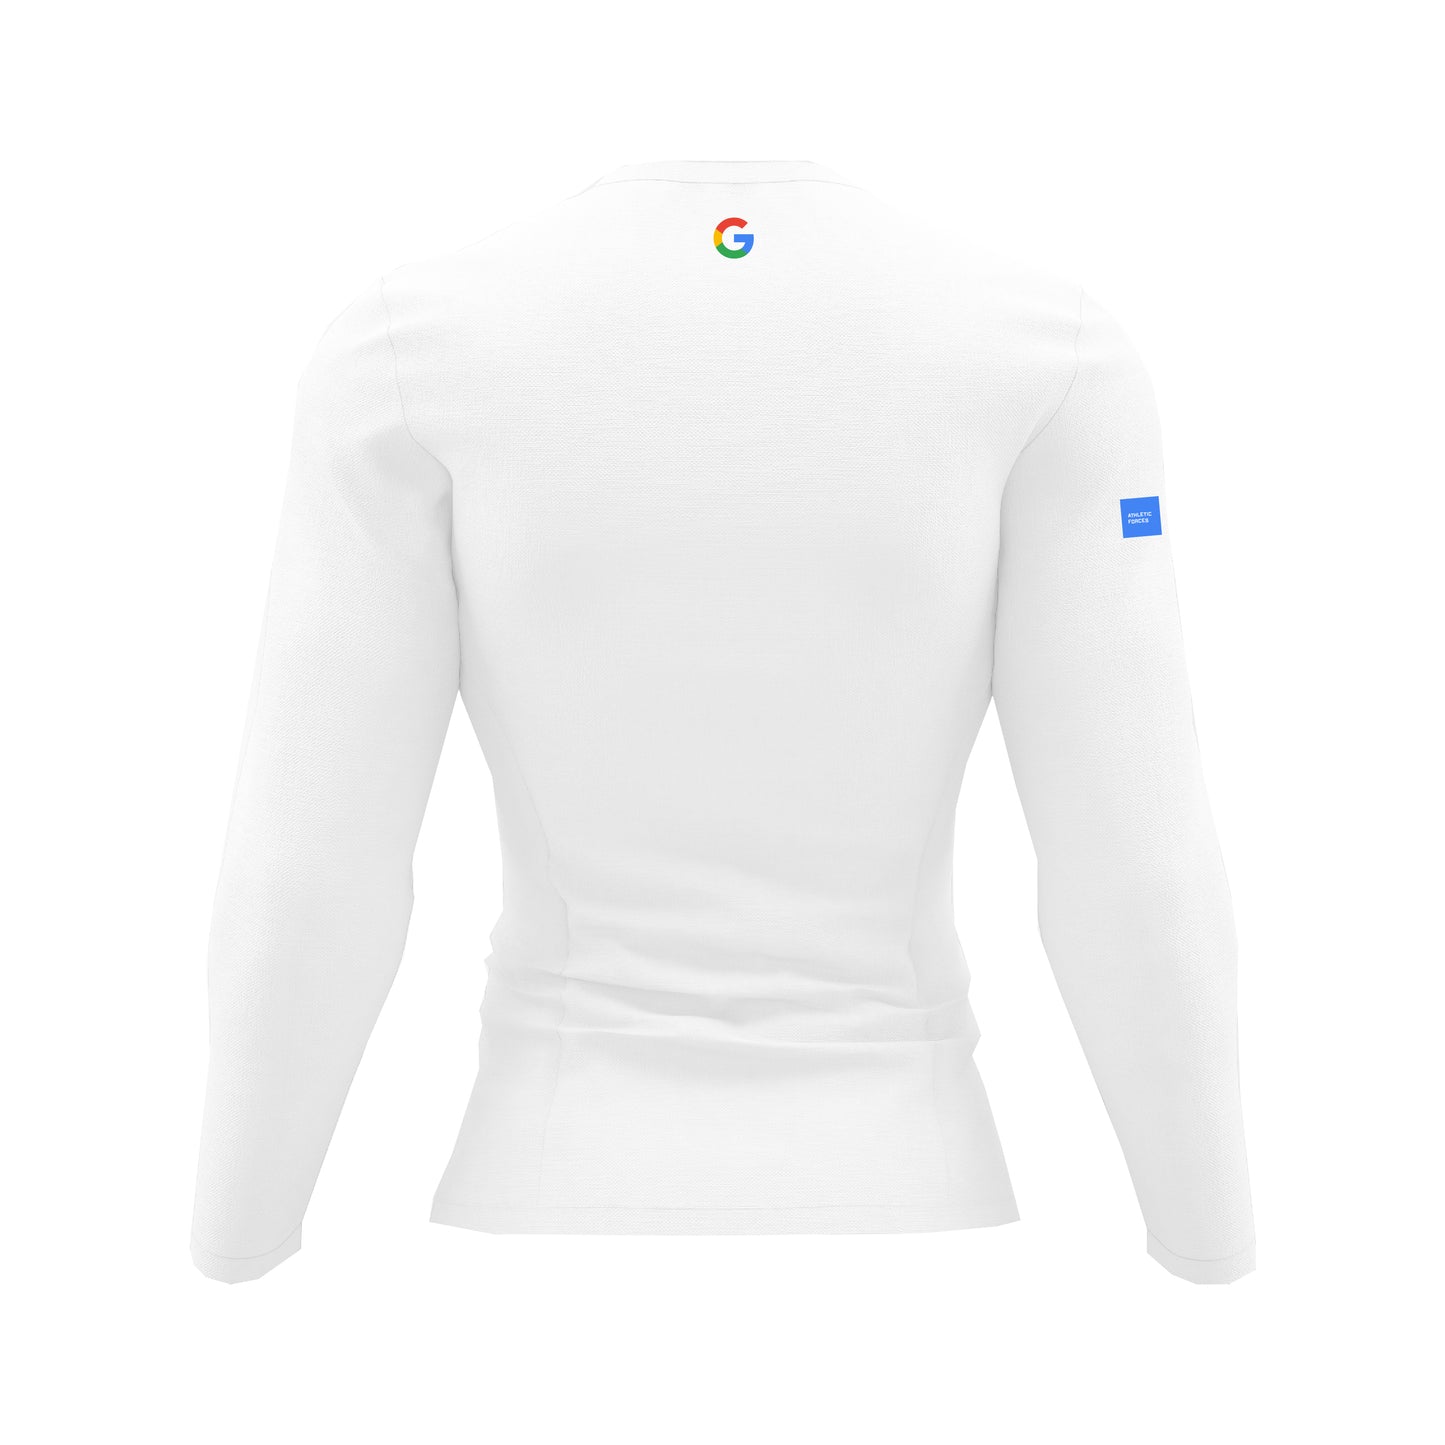 Google - Union of Forces ® Sweatshirt by Athletic Forces -  Model 1